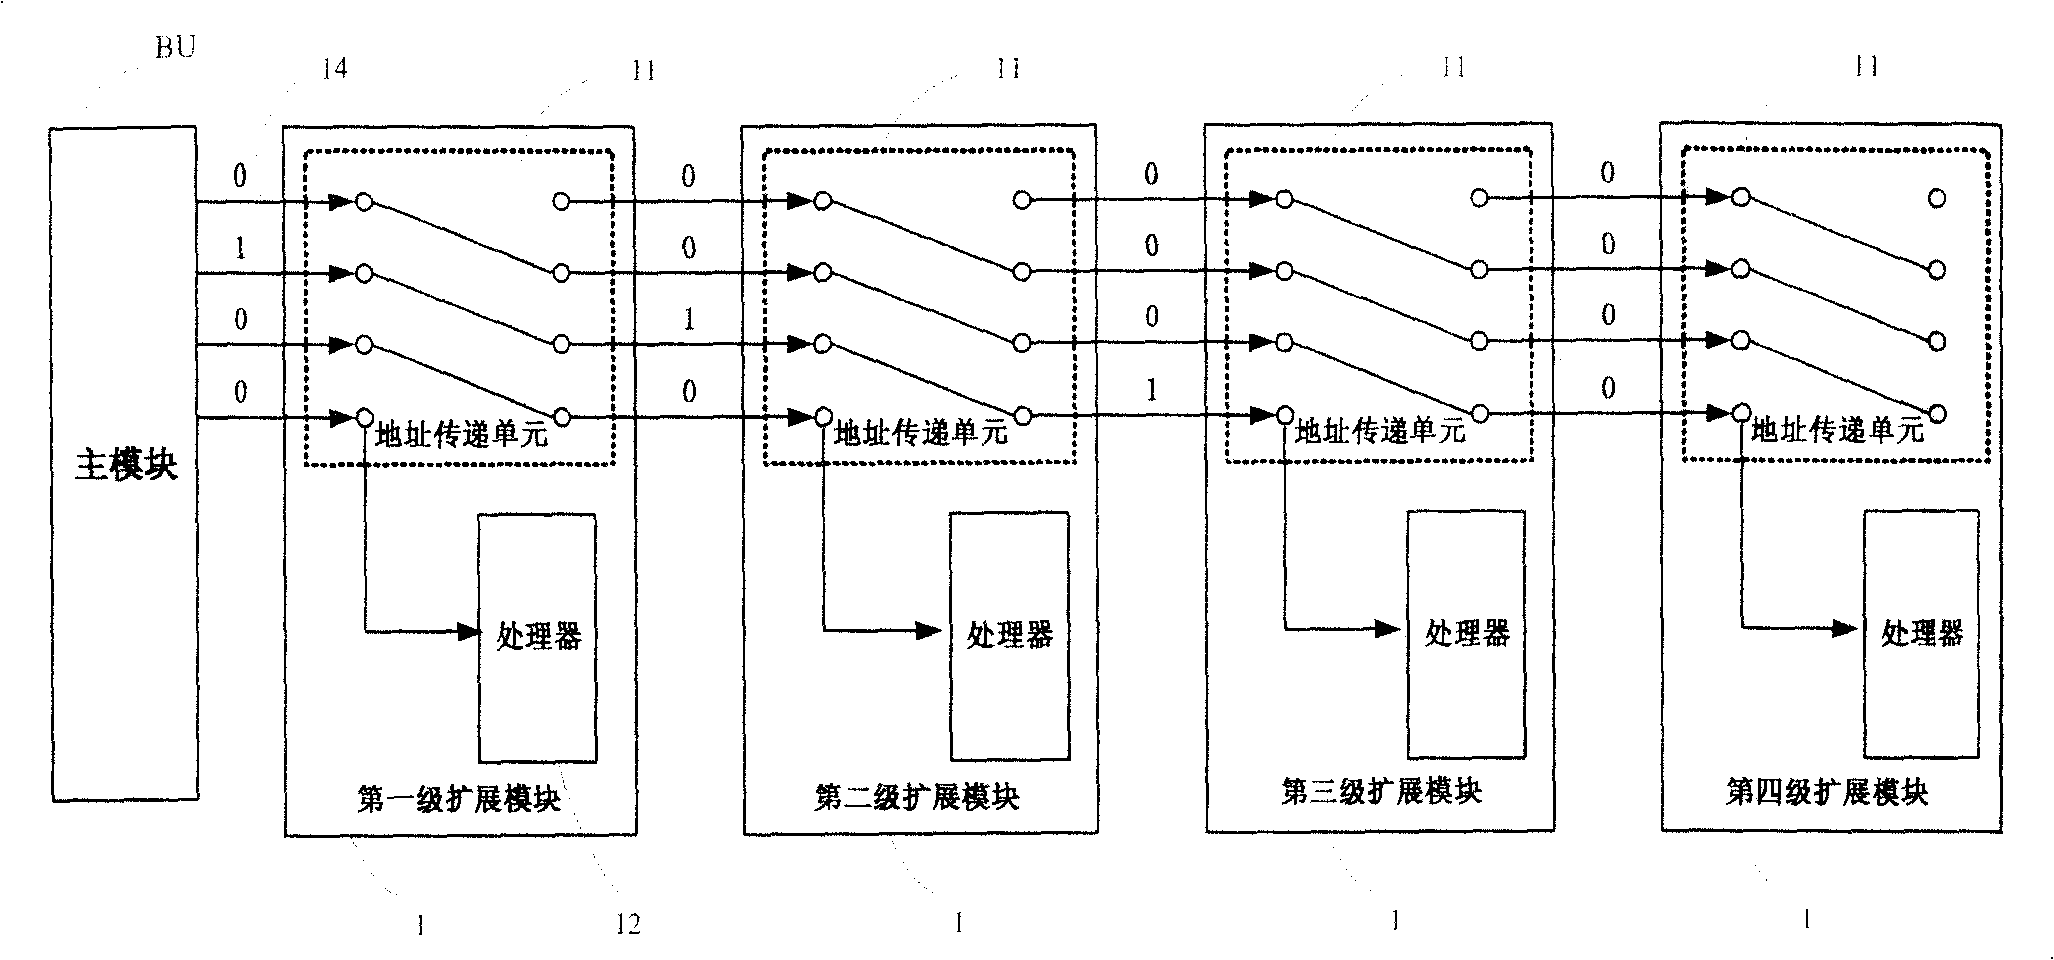 Programmable logical controller, its expanded module and its hardware expanding method